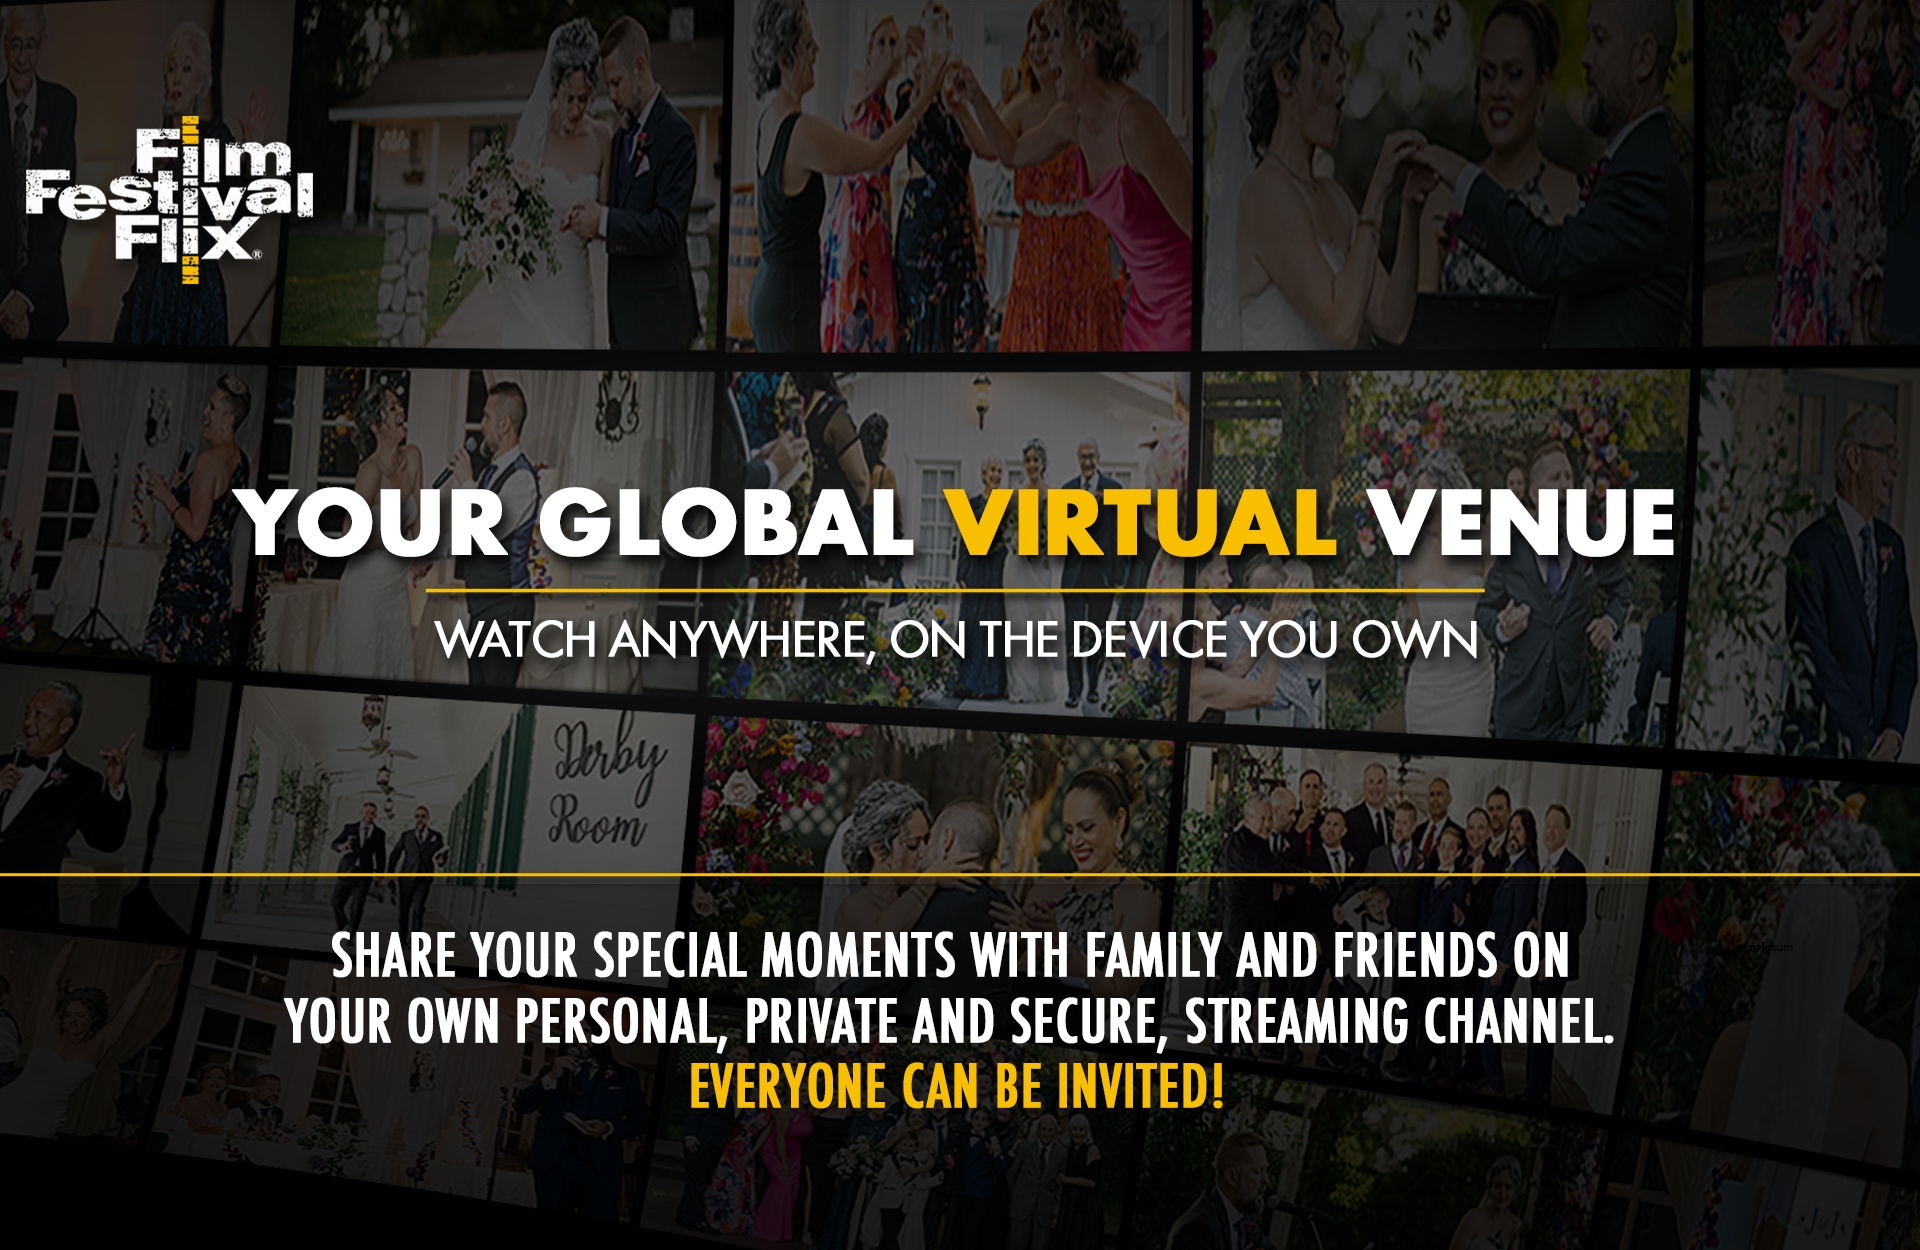 Online family events streaming platform. Personal Live Streaming Wedding Channel. For your Wedding share your special moments with family and friends on your own personal streaming channel. Everyone can be invited. Launch your personal, private and secure channel where you can share your special moments powered by our global streaming platform. Friends and family can watch on the device they own: TV apps including Roku, Apple TV, Amazon Fire TV, and Android TV. Mobile apps including iOS and Android. And web browser on your tablet, phone, or computer. Live stream your ceremony and/or publish it later for everyone to watch anywhere, anytime. Share additional videos from your event and collect video memories from your guests. Update family and friends with our direct communication tools. 24/7 Dashboard access to see who’s watching. Be present at your ceremony! Our experienced team is ready to support you and your team on the most important day of your life. We’ve got you covered.